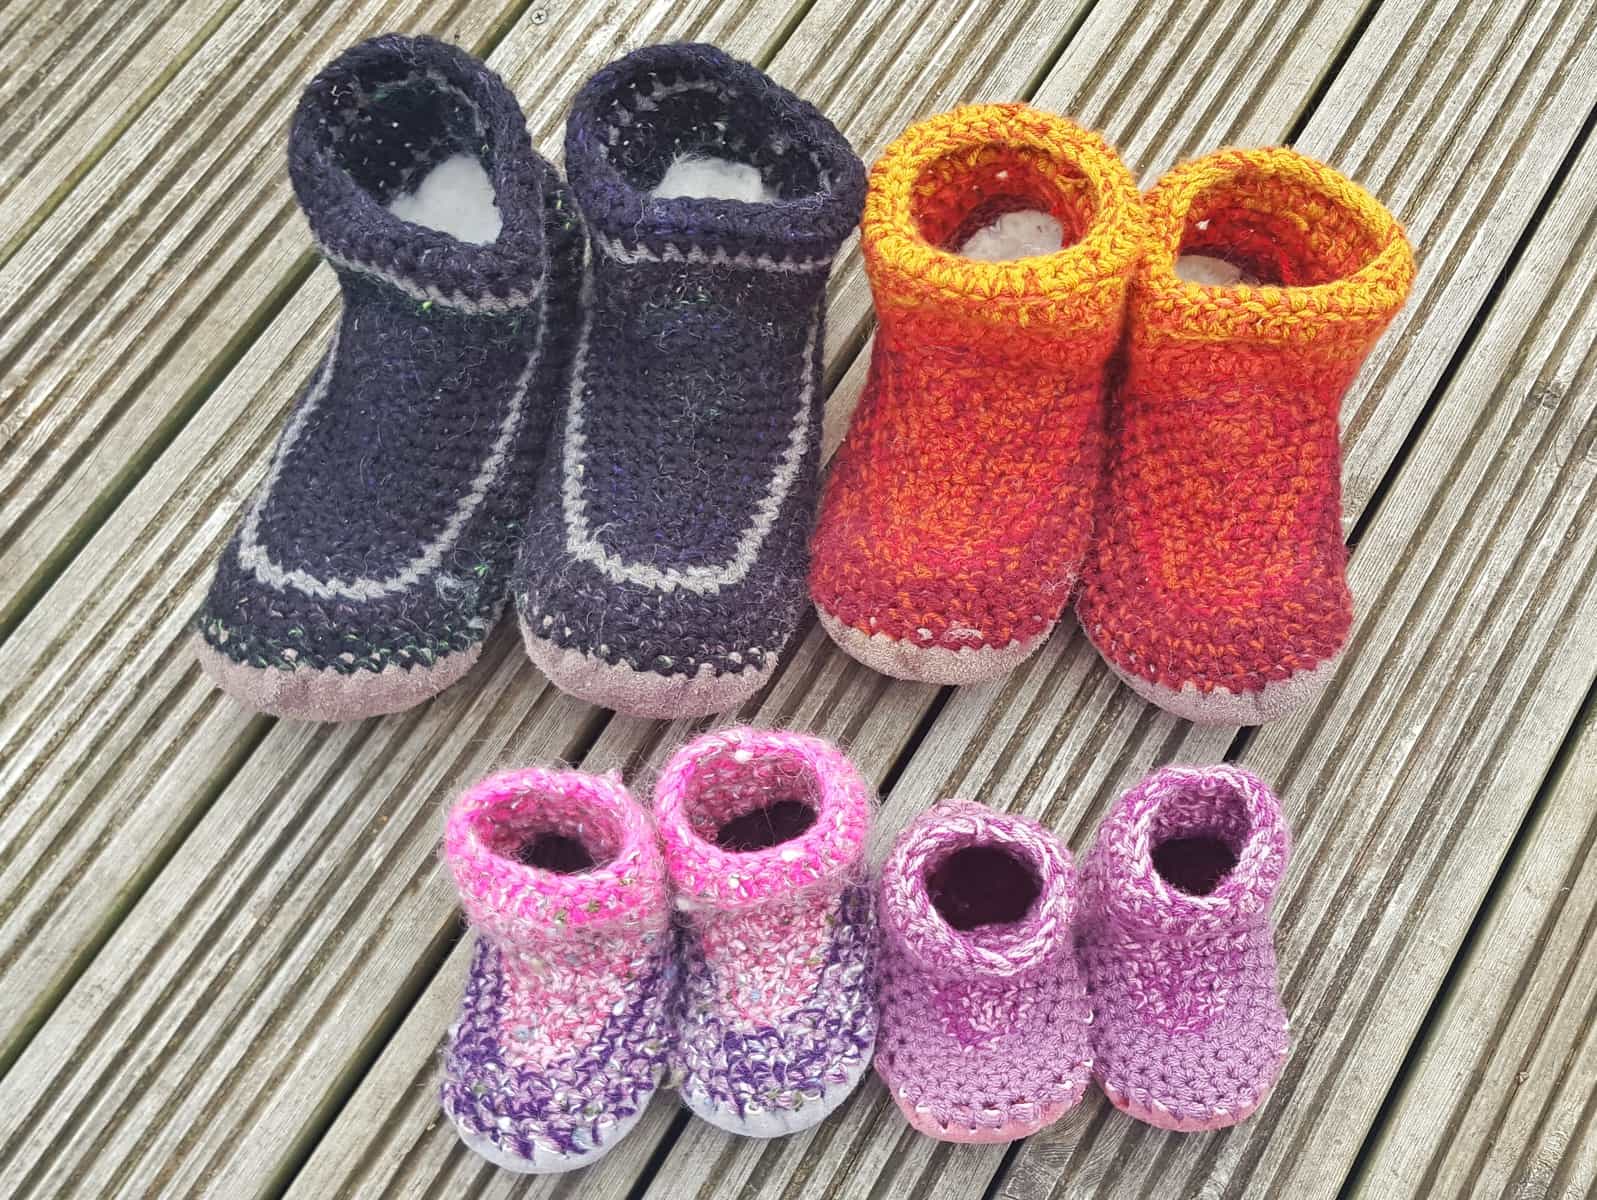 Slippers | The whole family will love these ethically manufactured slippers that were handmade on a smallholding in Scotland. The whole process from sheep rearing and shearing takes place on the same land. The wool is spun and the slippers are knitted by hand with a sheepskin base. They are available in your choice of colours and sizes from babies to adult.